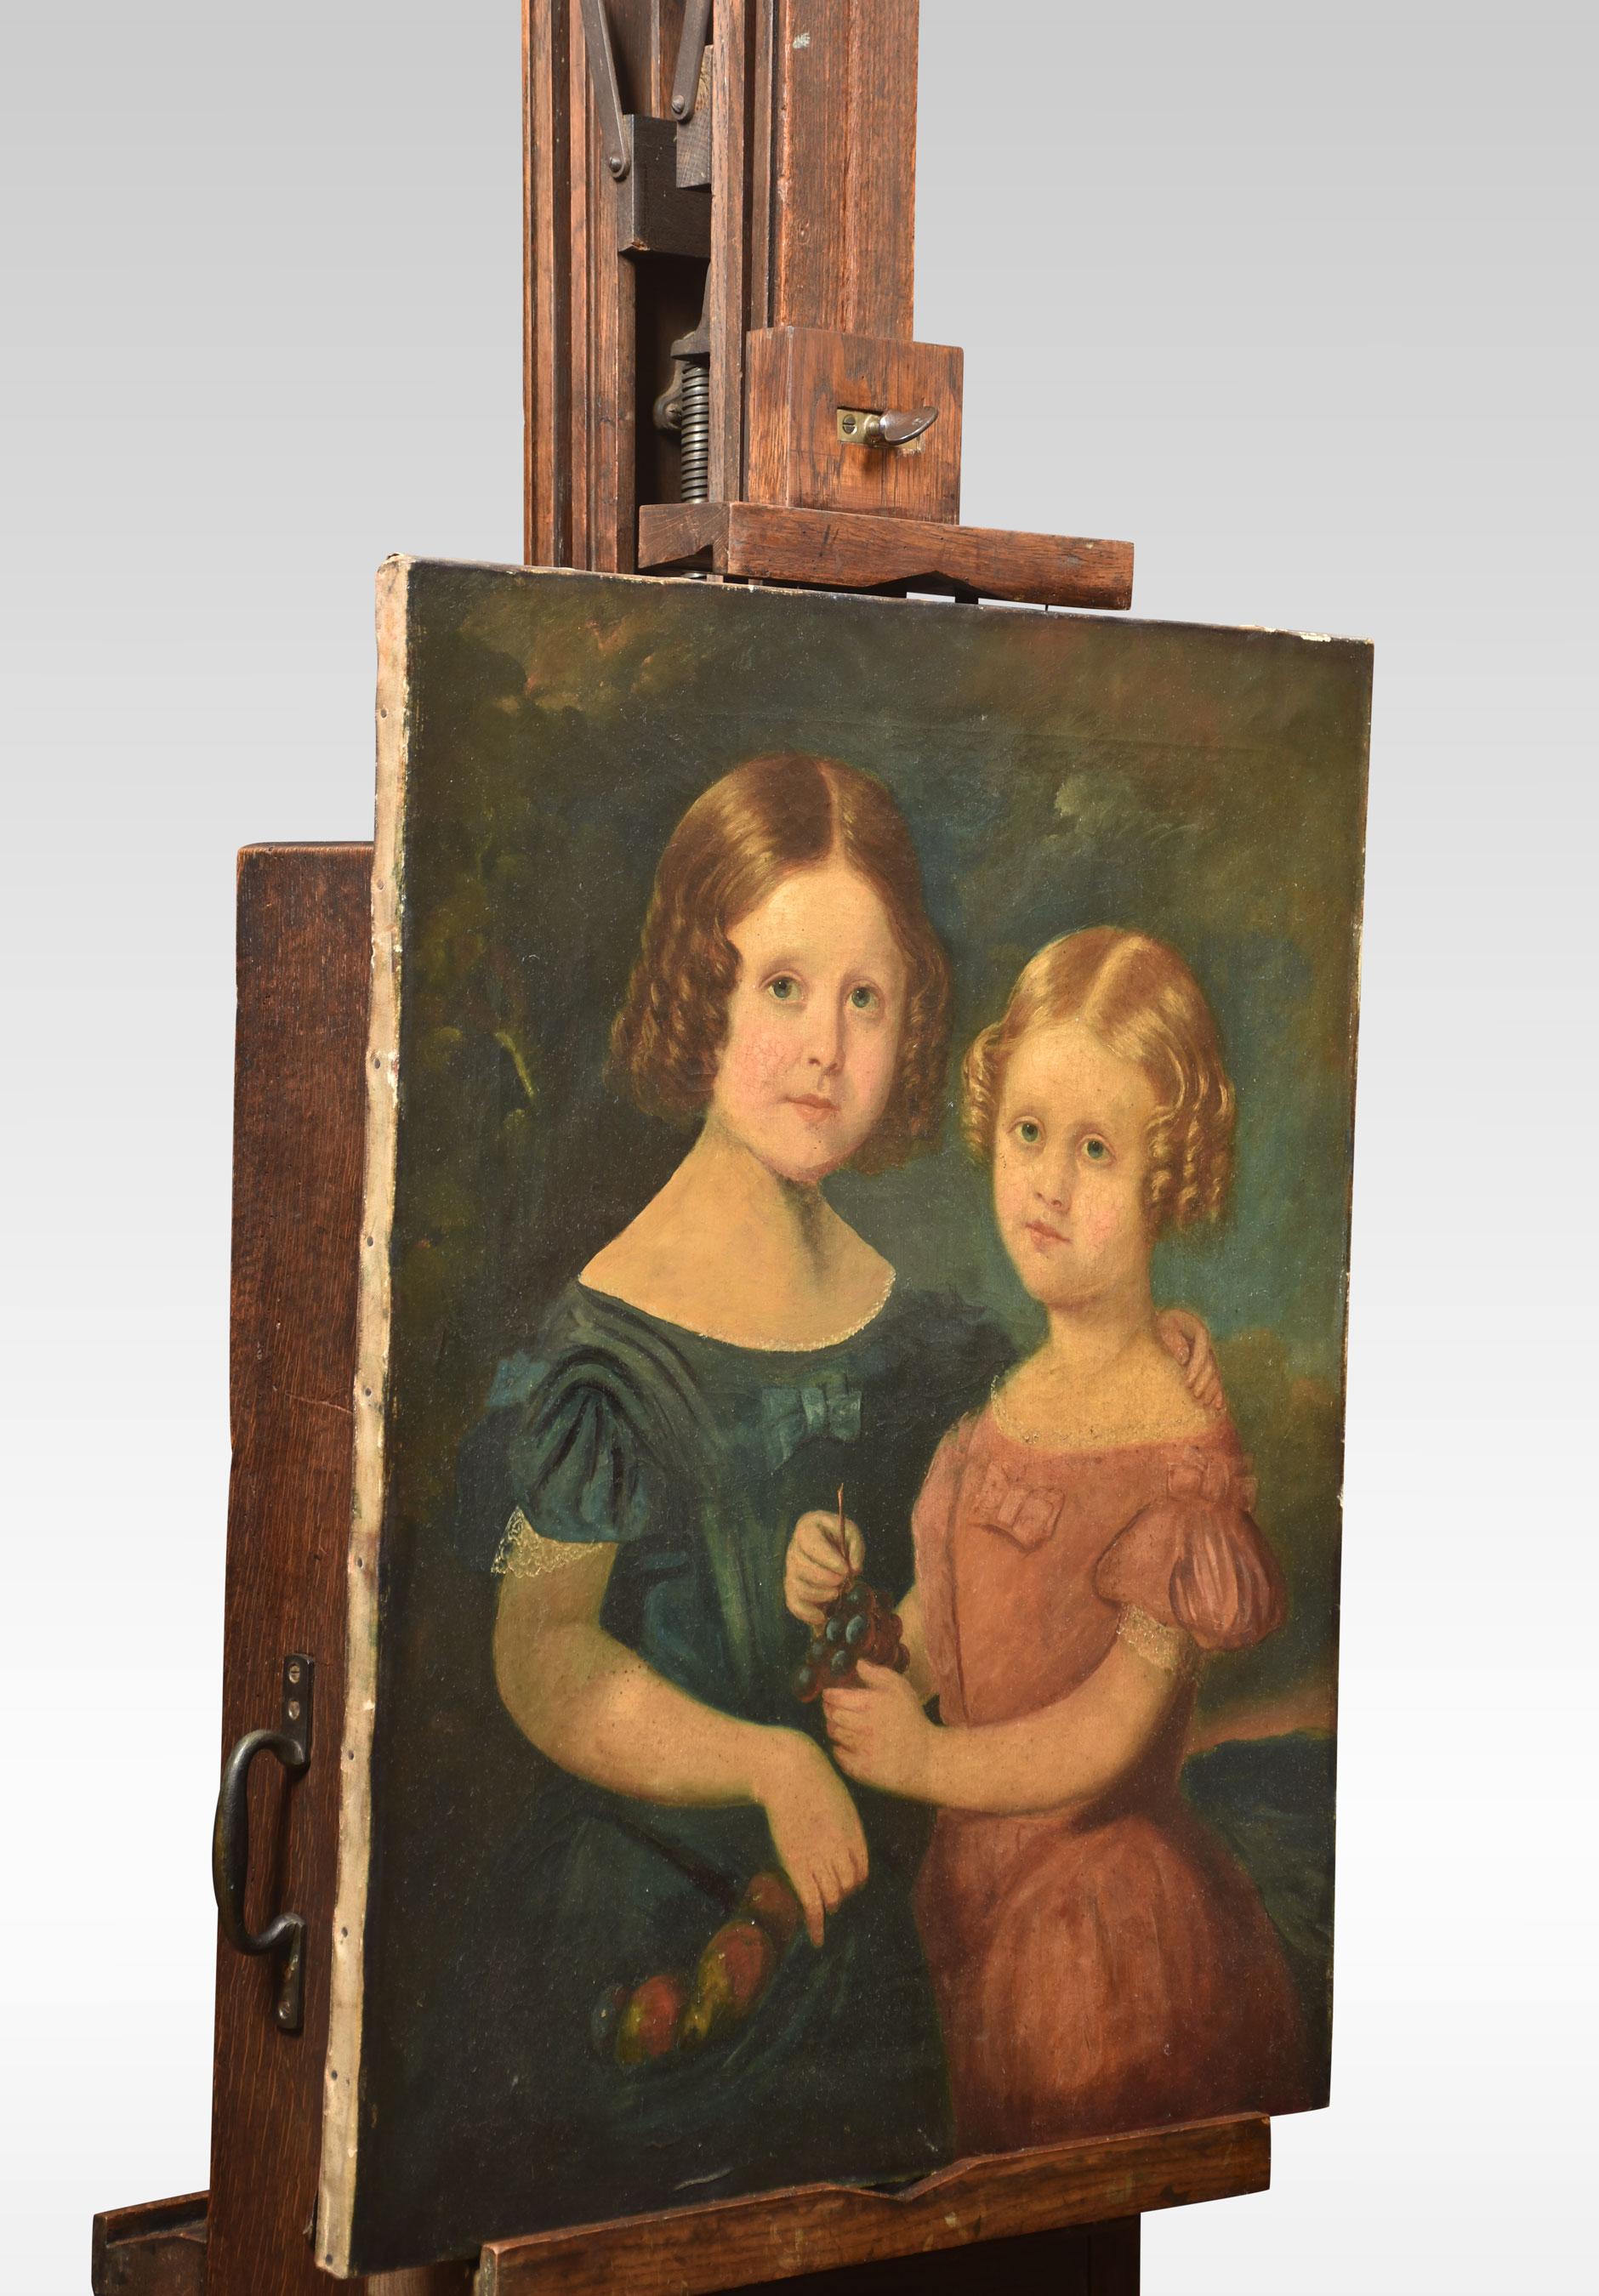 large oak double sided artist’s fully adjustable studio easel raised up on trestle base terminating in castors. Retaining its original winding handle.
Dimensions
Height 72 inches ajustable to 105 inches
Width 24 inches
Depth 25.5 inches.